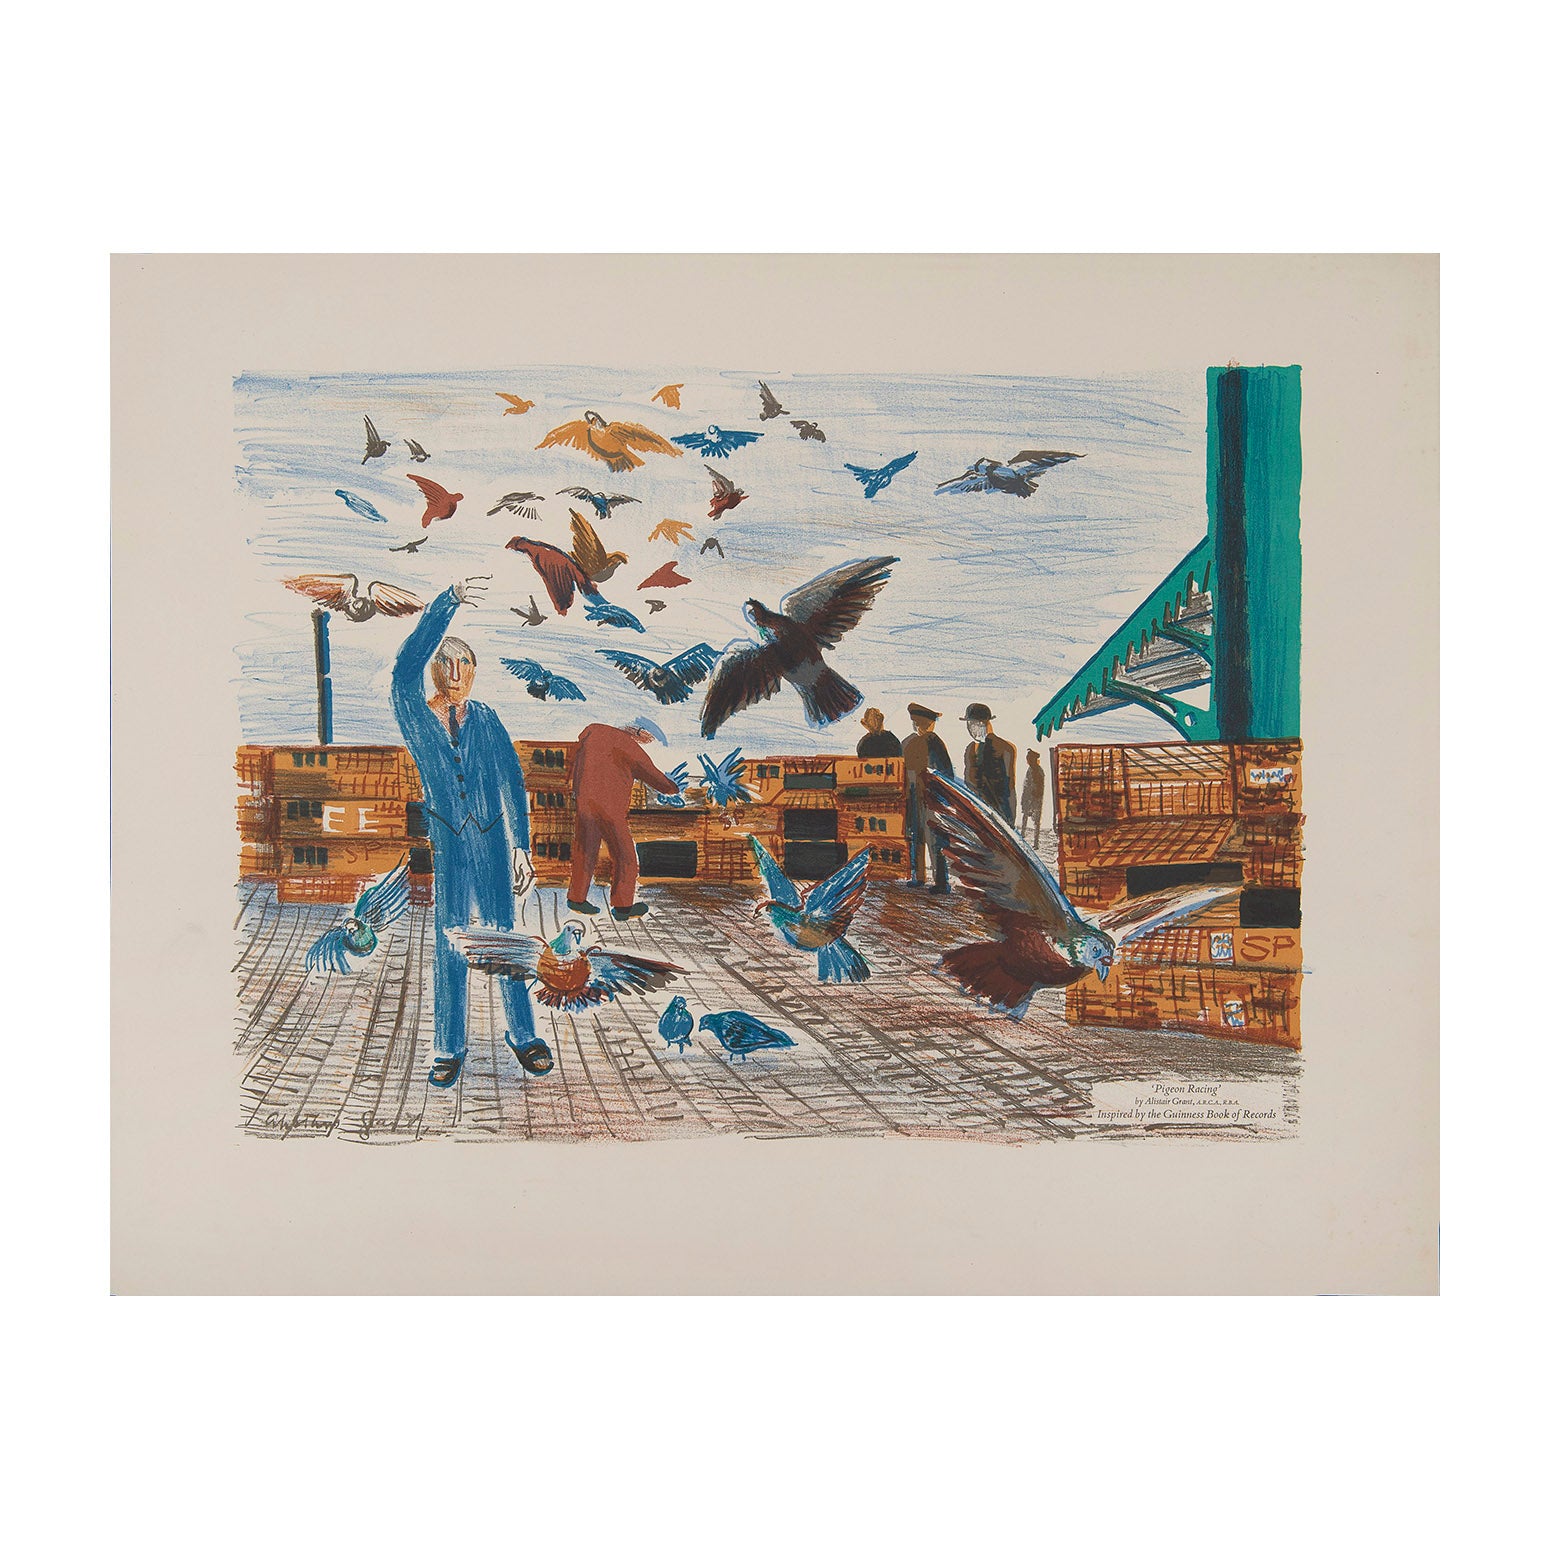 Guinness Lithograph, Pigeon Racing by Alistair Grant, printed by the Curwen Studio and published in 1962.